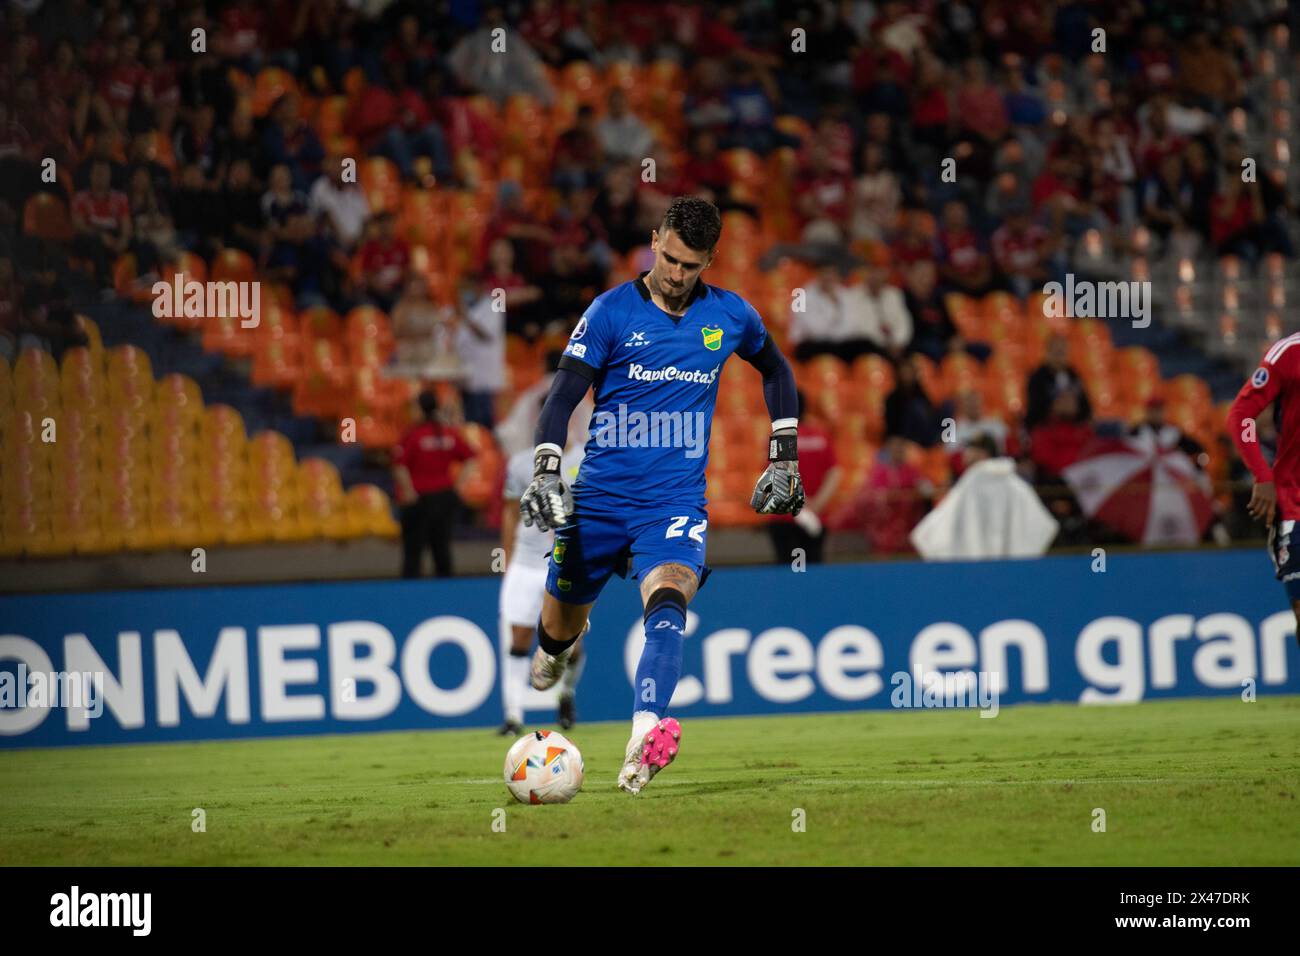 Medellin, Colombia. 25th Apr, 2024. Defensa y Justicia's goalkeeper Cristopher Fiermarin during the Conmebol Sudamericana match between Deportivo Independiente Medellin V Defensa y Justicia in Medellin, Colombia, April 25, 2024. Photo by: Camilo Moreno/Long Visual Press Credit: Long Visual Press/Alamy Live News Stock Photo